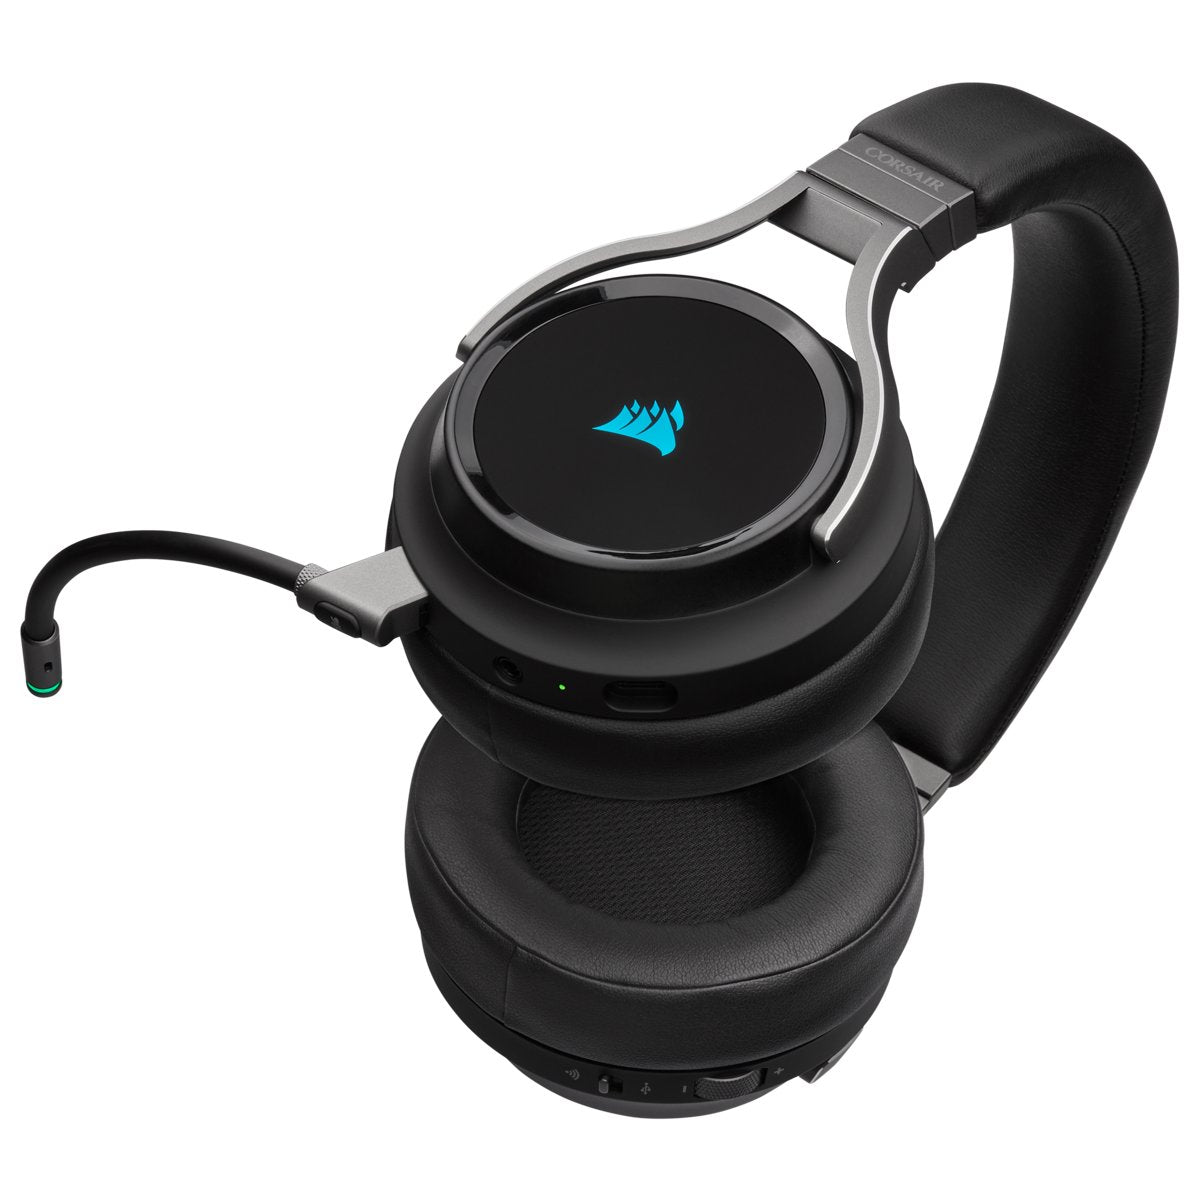 New Corsair HS55 Core Carbon Wireless Gaming Headset for PC, Mac